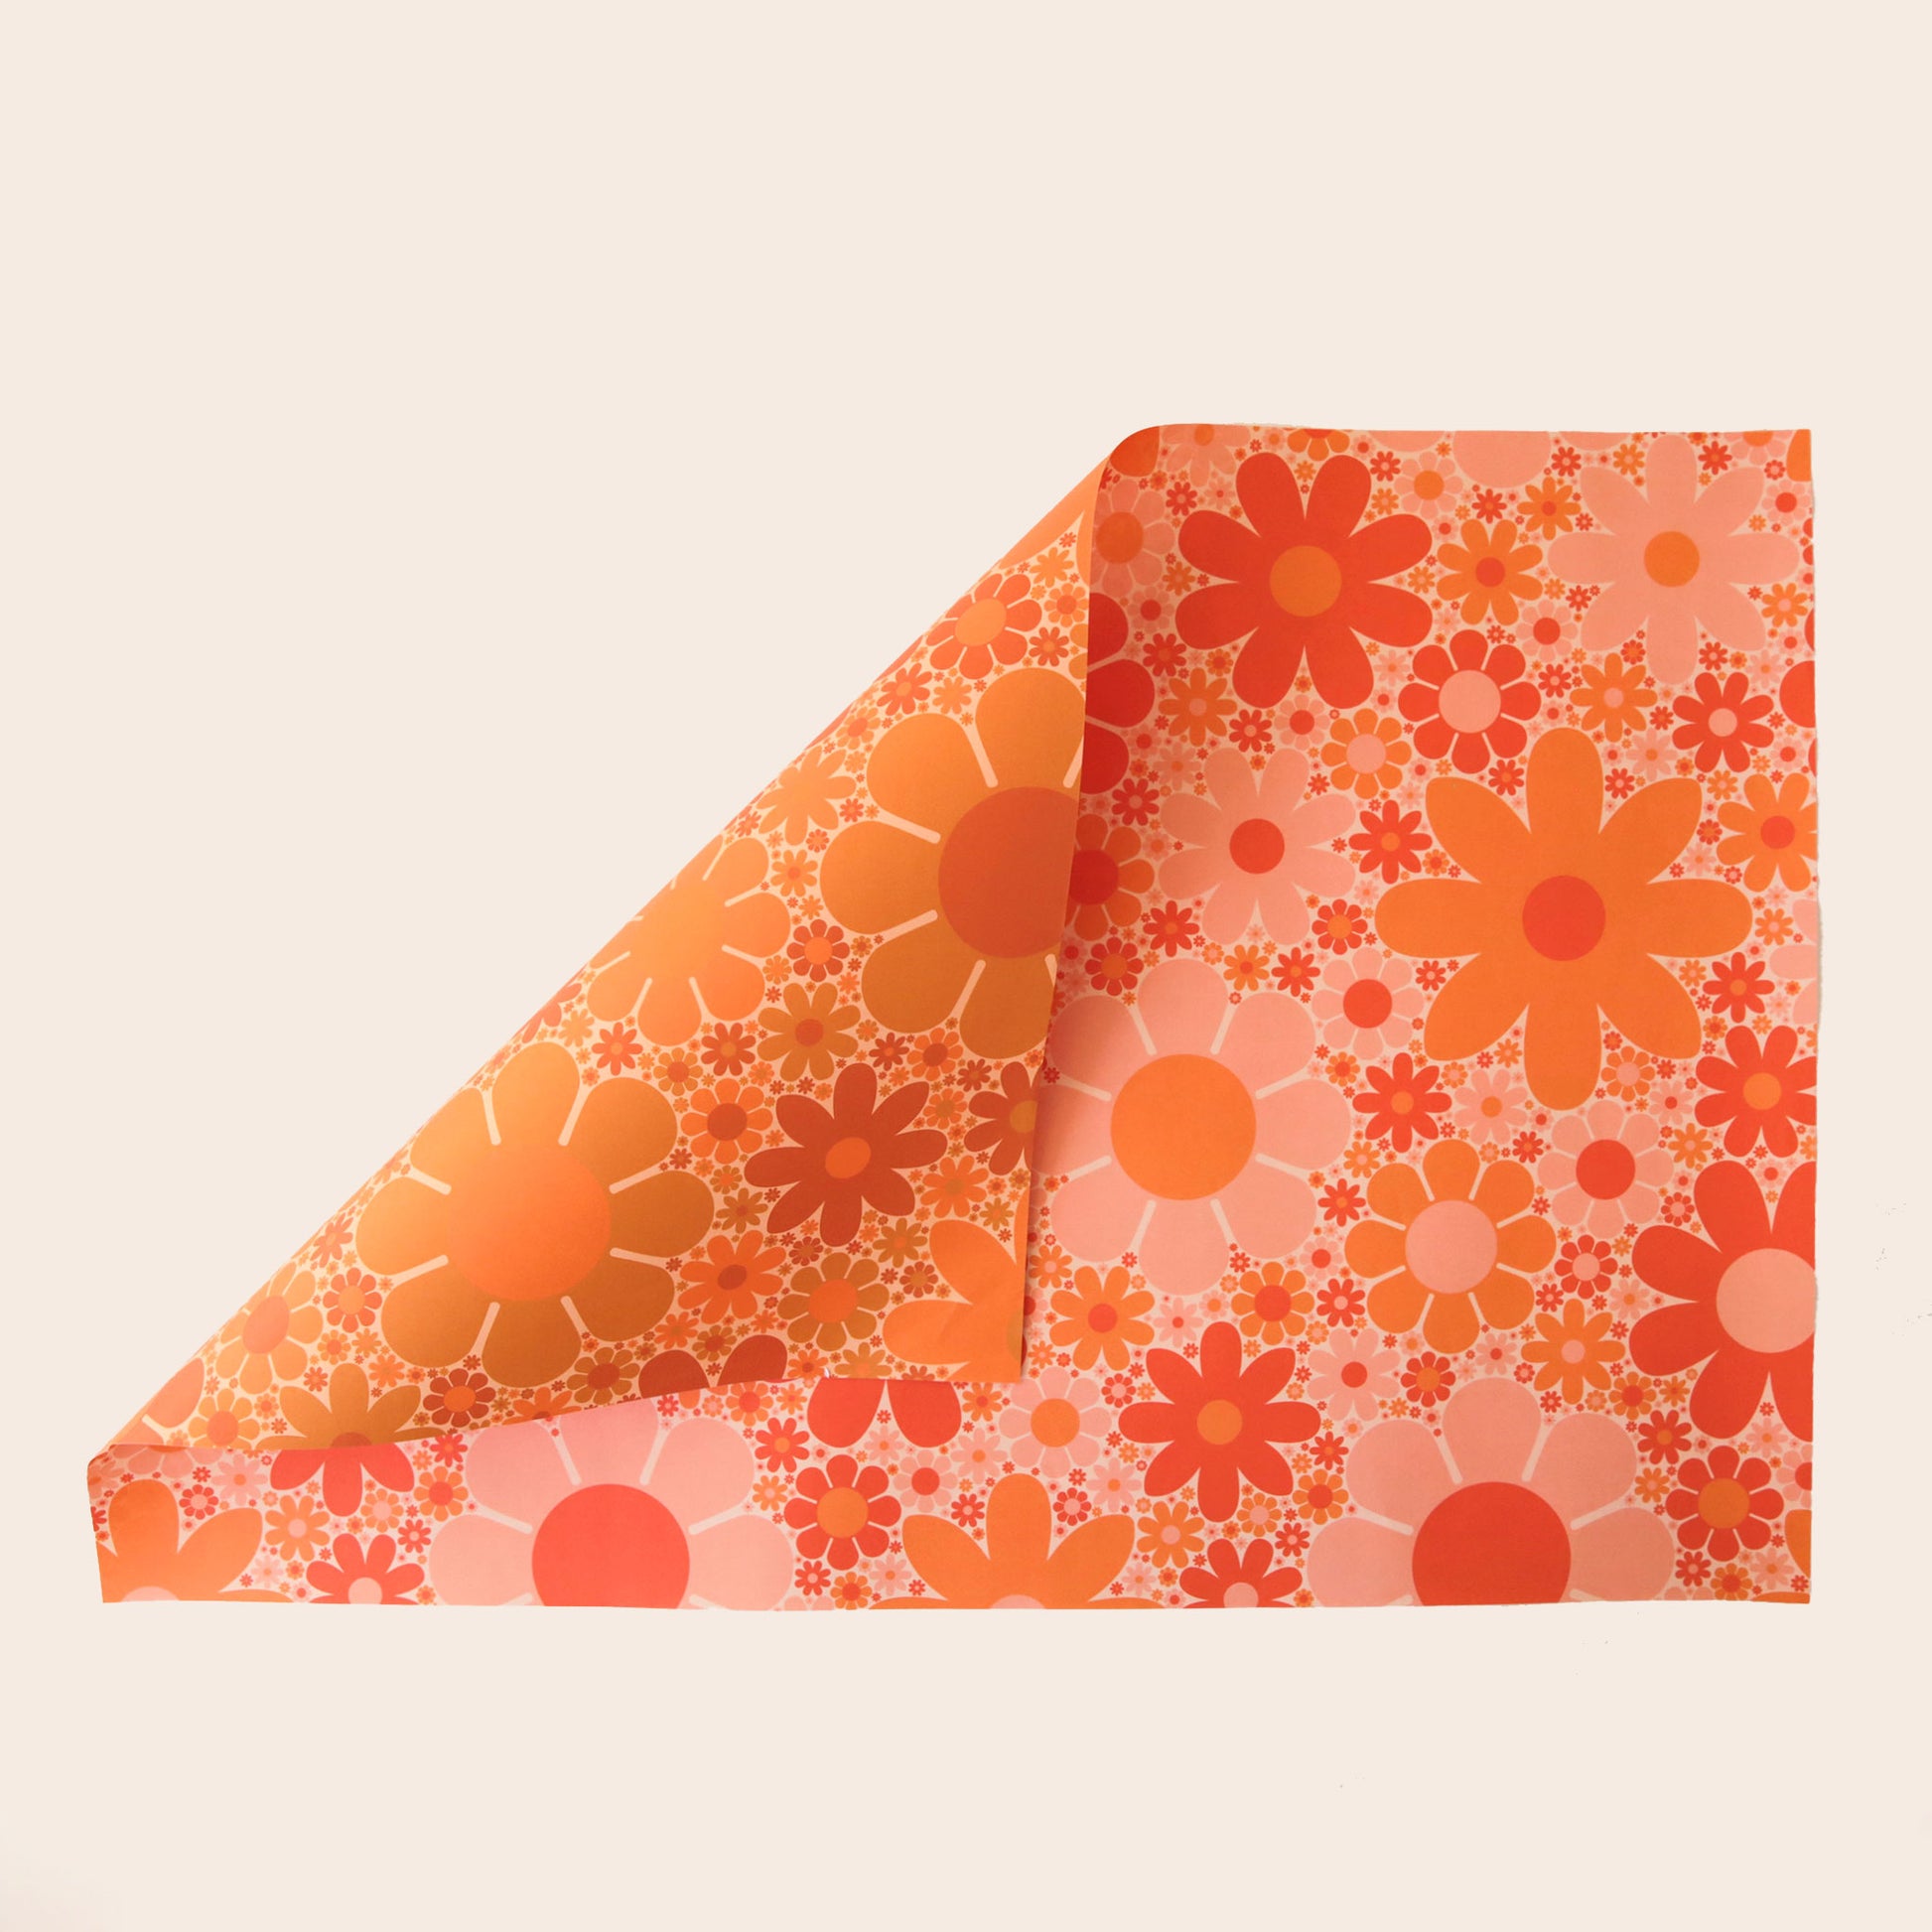 Sheet of wrapping paper filled with orange and pink flowers. The sheet is bent forward, revealing the other side of the wrapping paper. The back side is covered in the same floral print in oranges and yellows.